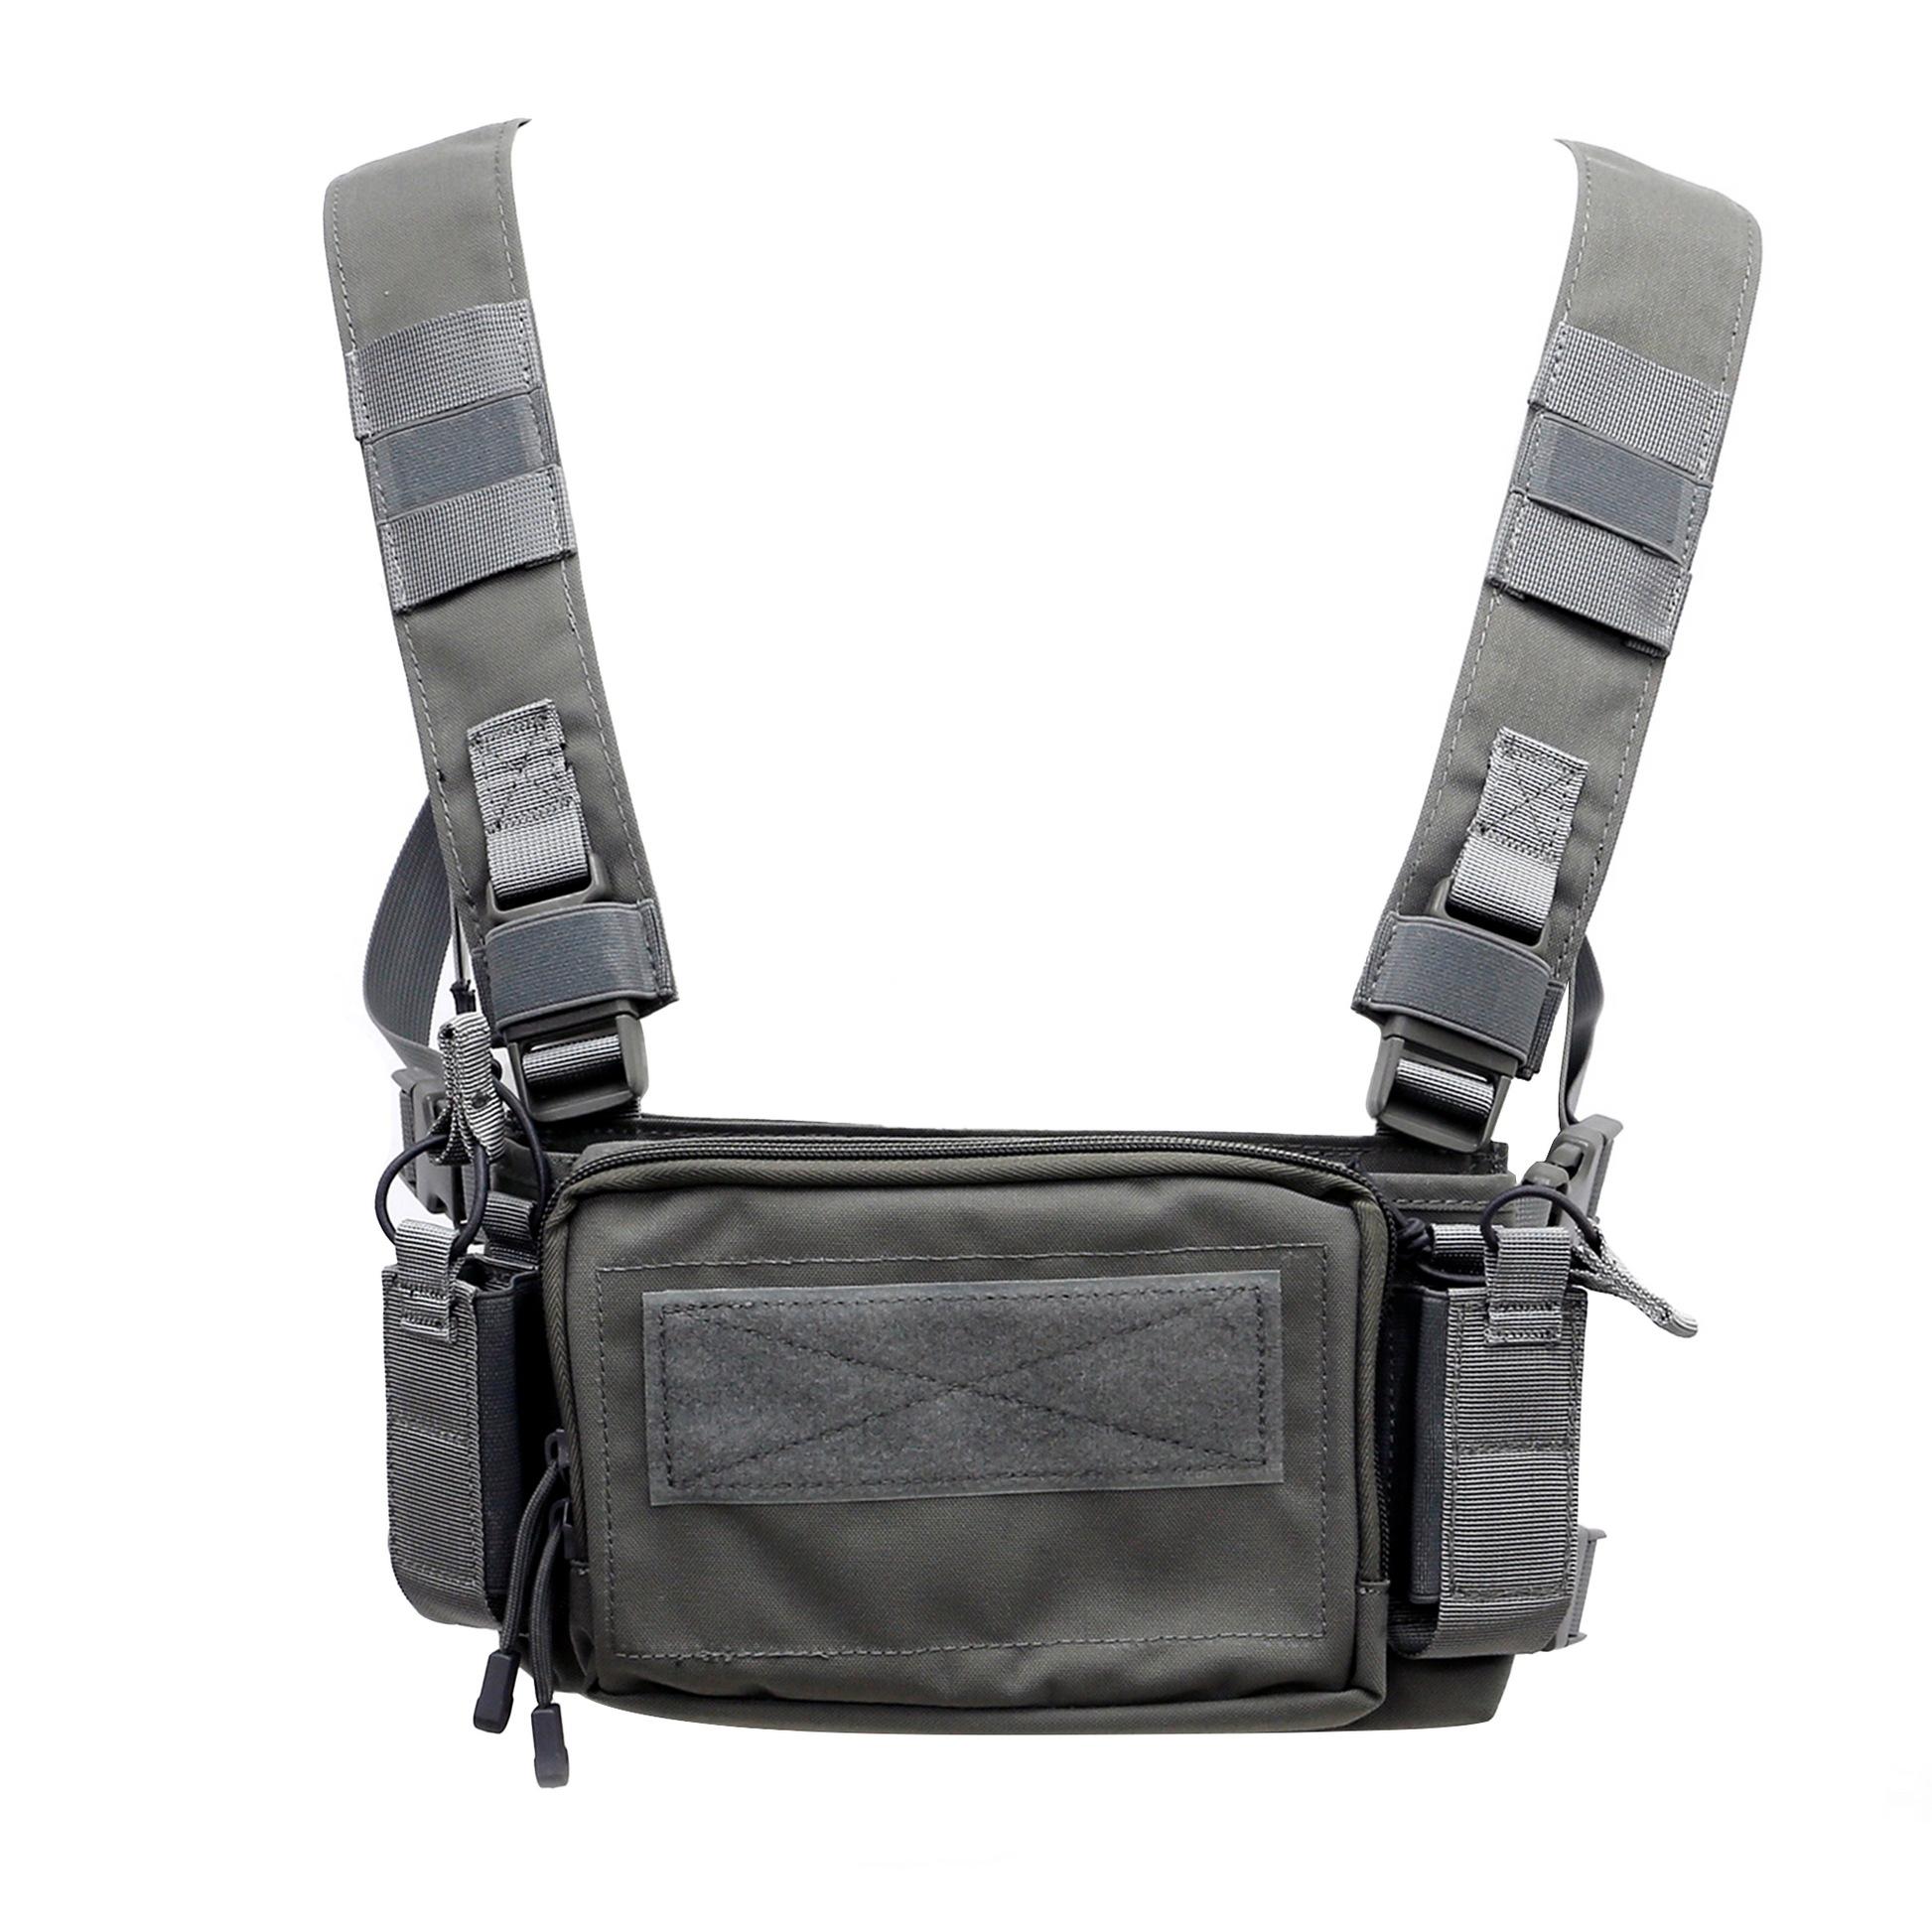 IJ Tactical Gray Minimalist Chest Rig